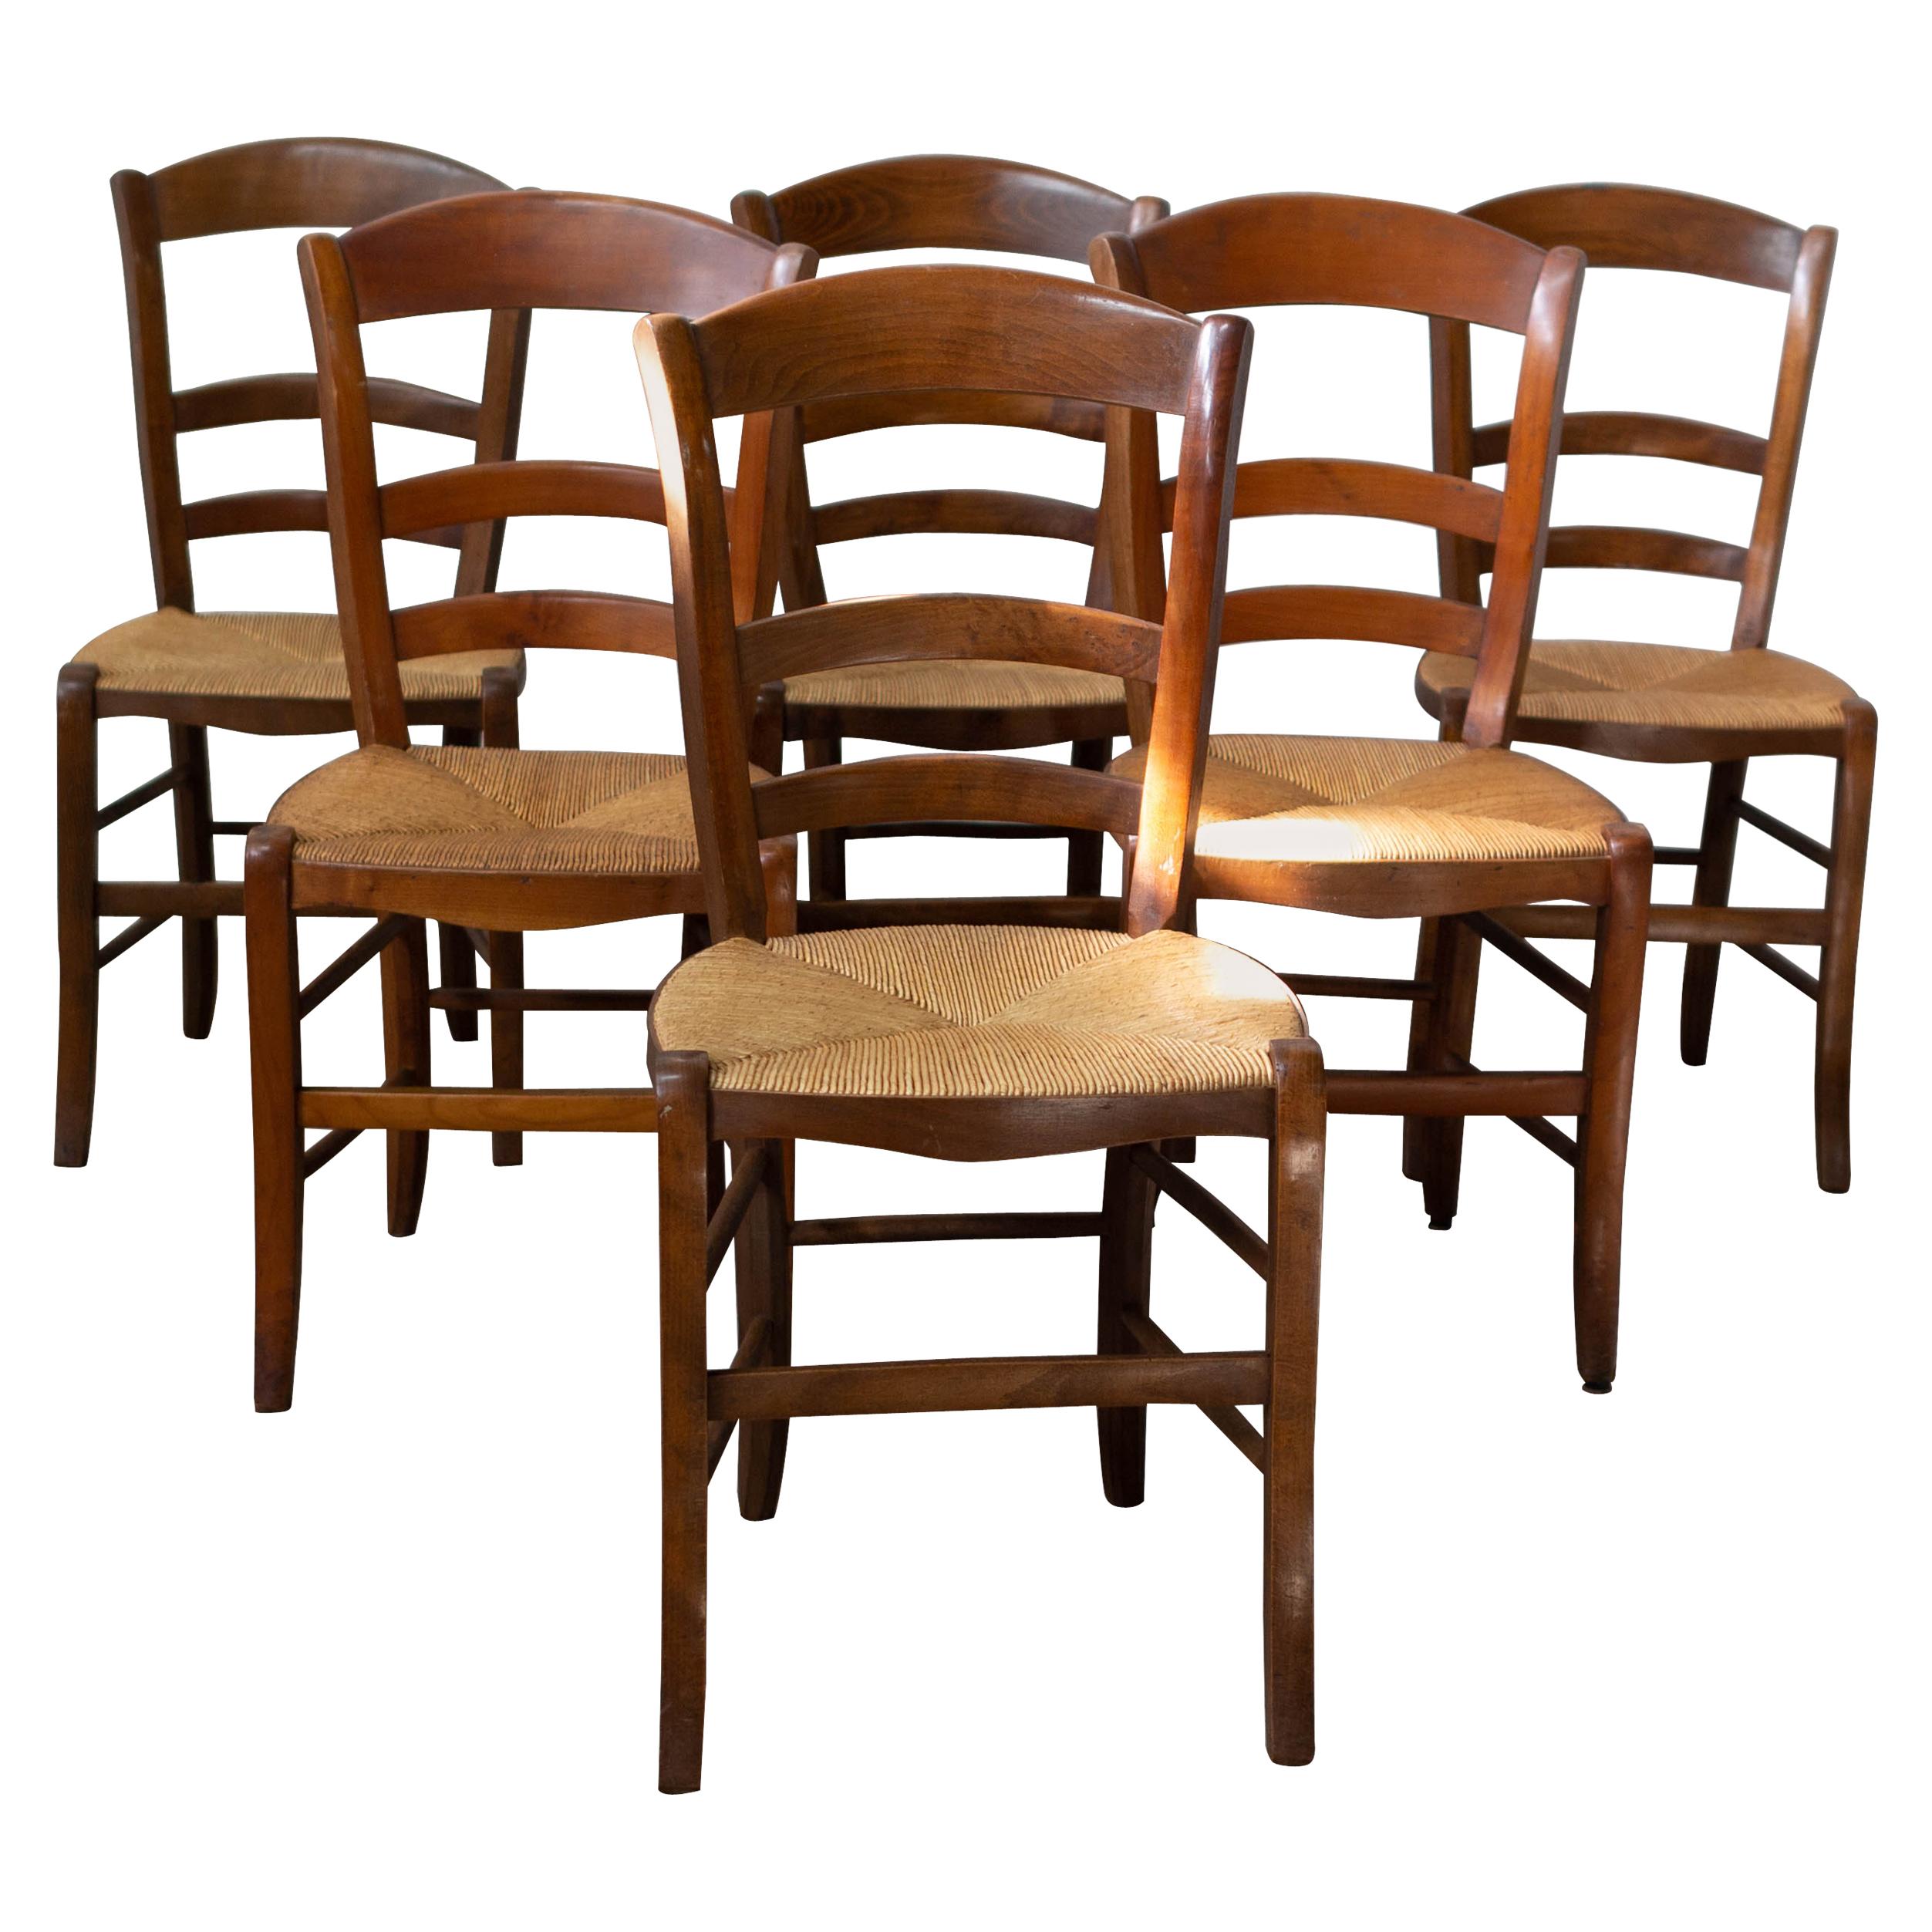 Six Dining Chairs French Country Ladder Back Rush Seats, Early 20th Century